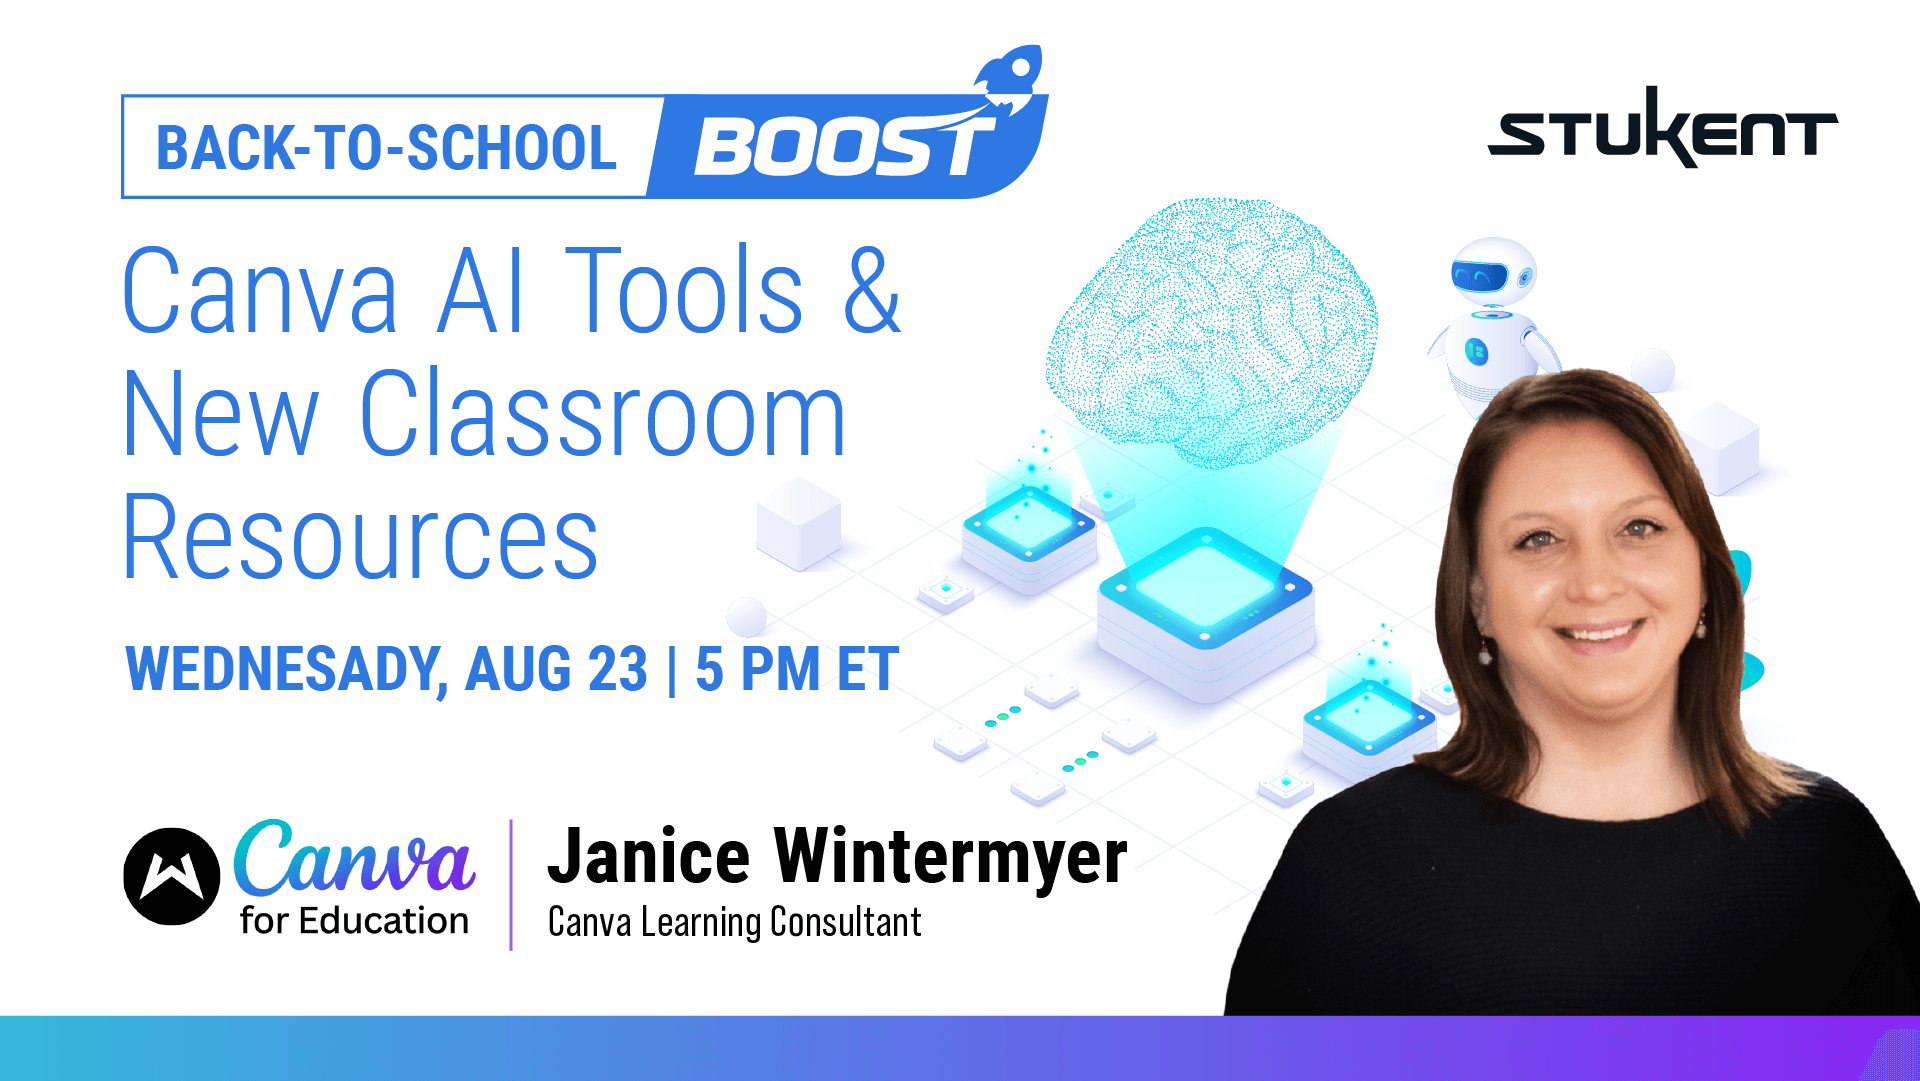 Back-to-School Boost: Canva AI Tools & New Classroom Resources